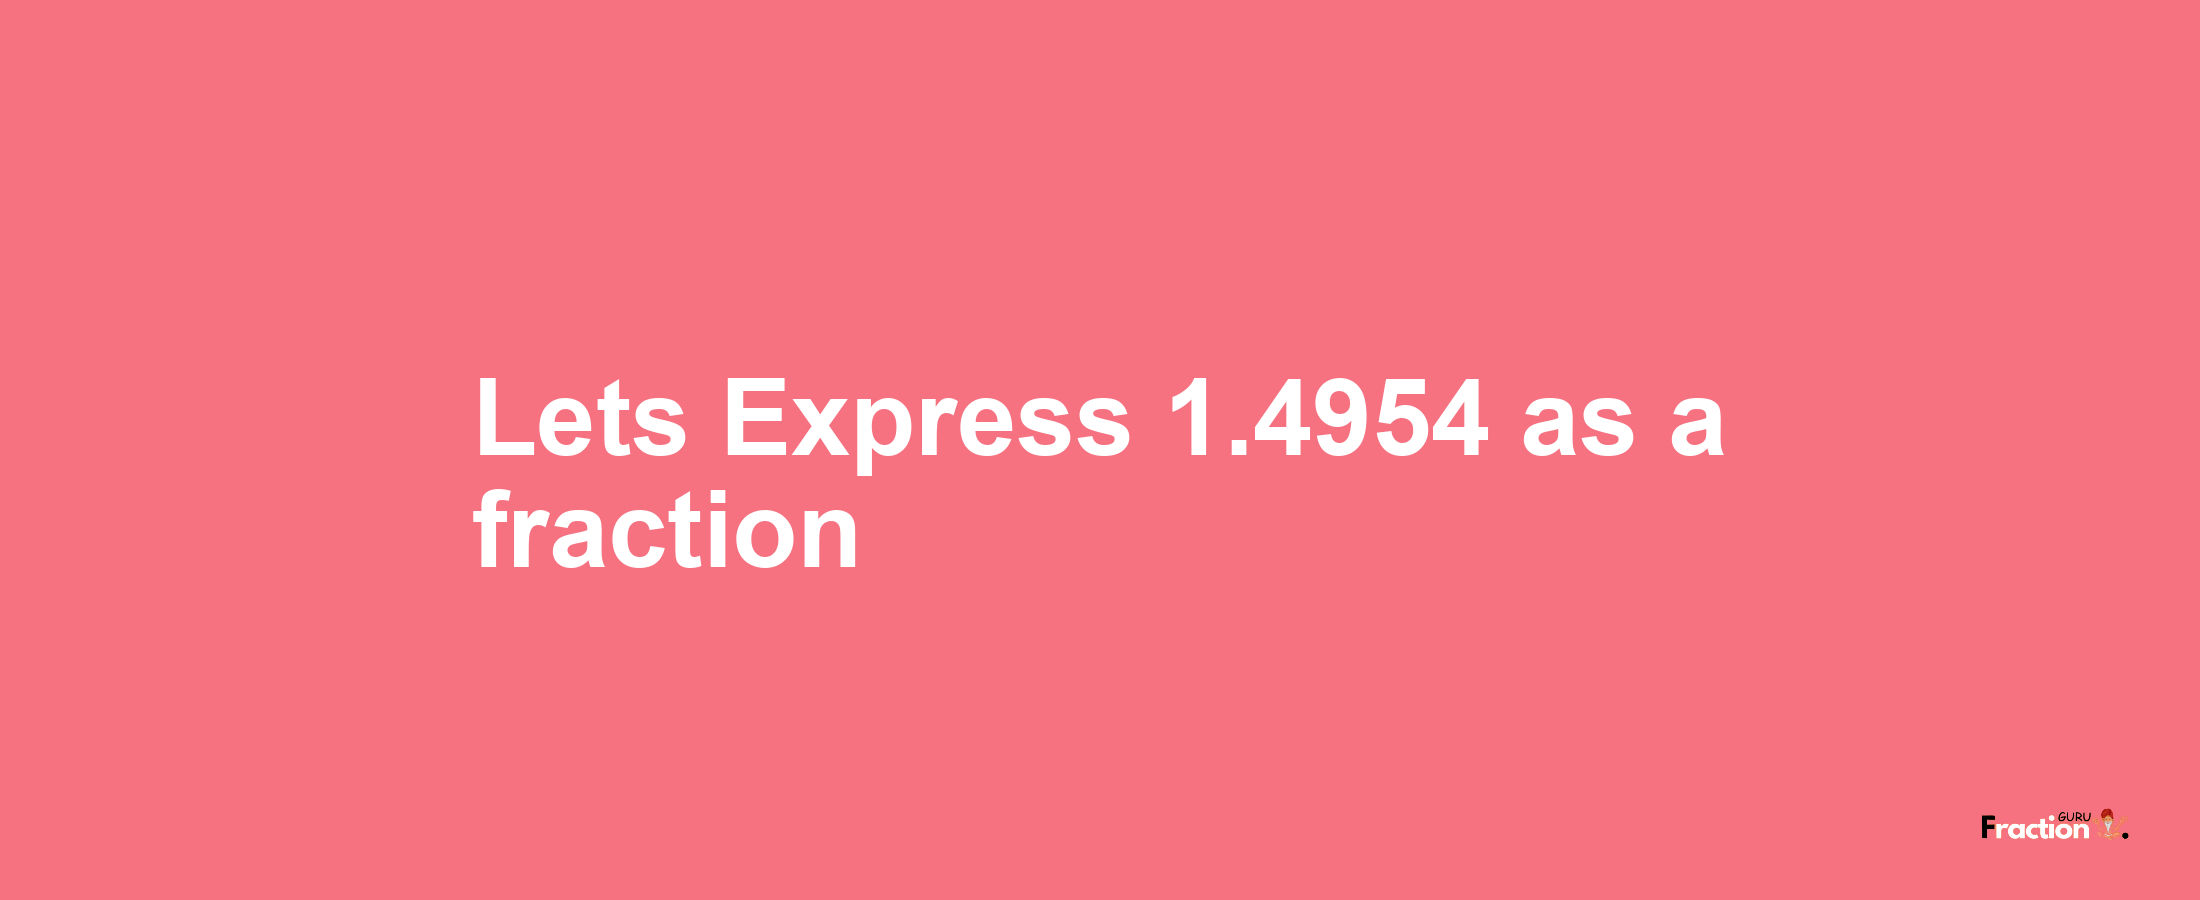 Lets Express 1.4954 as afraction